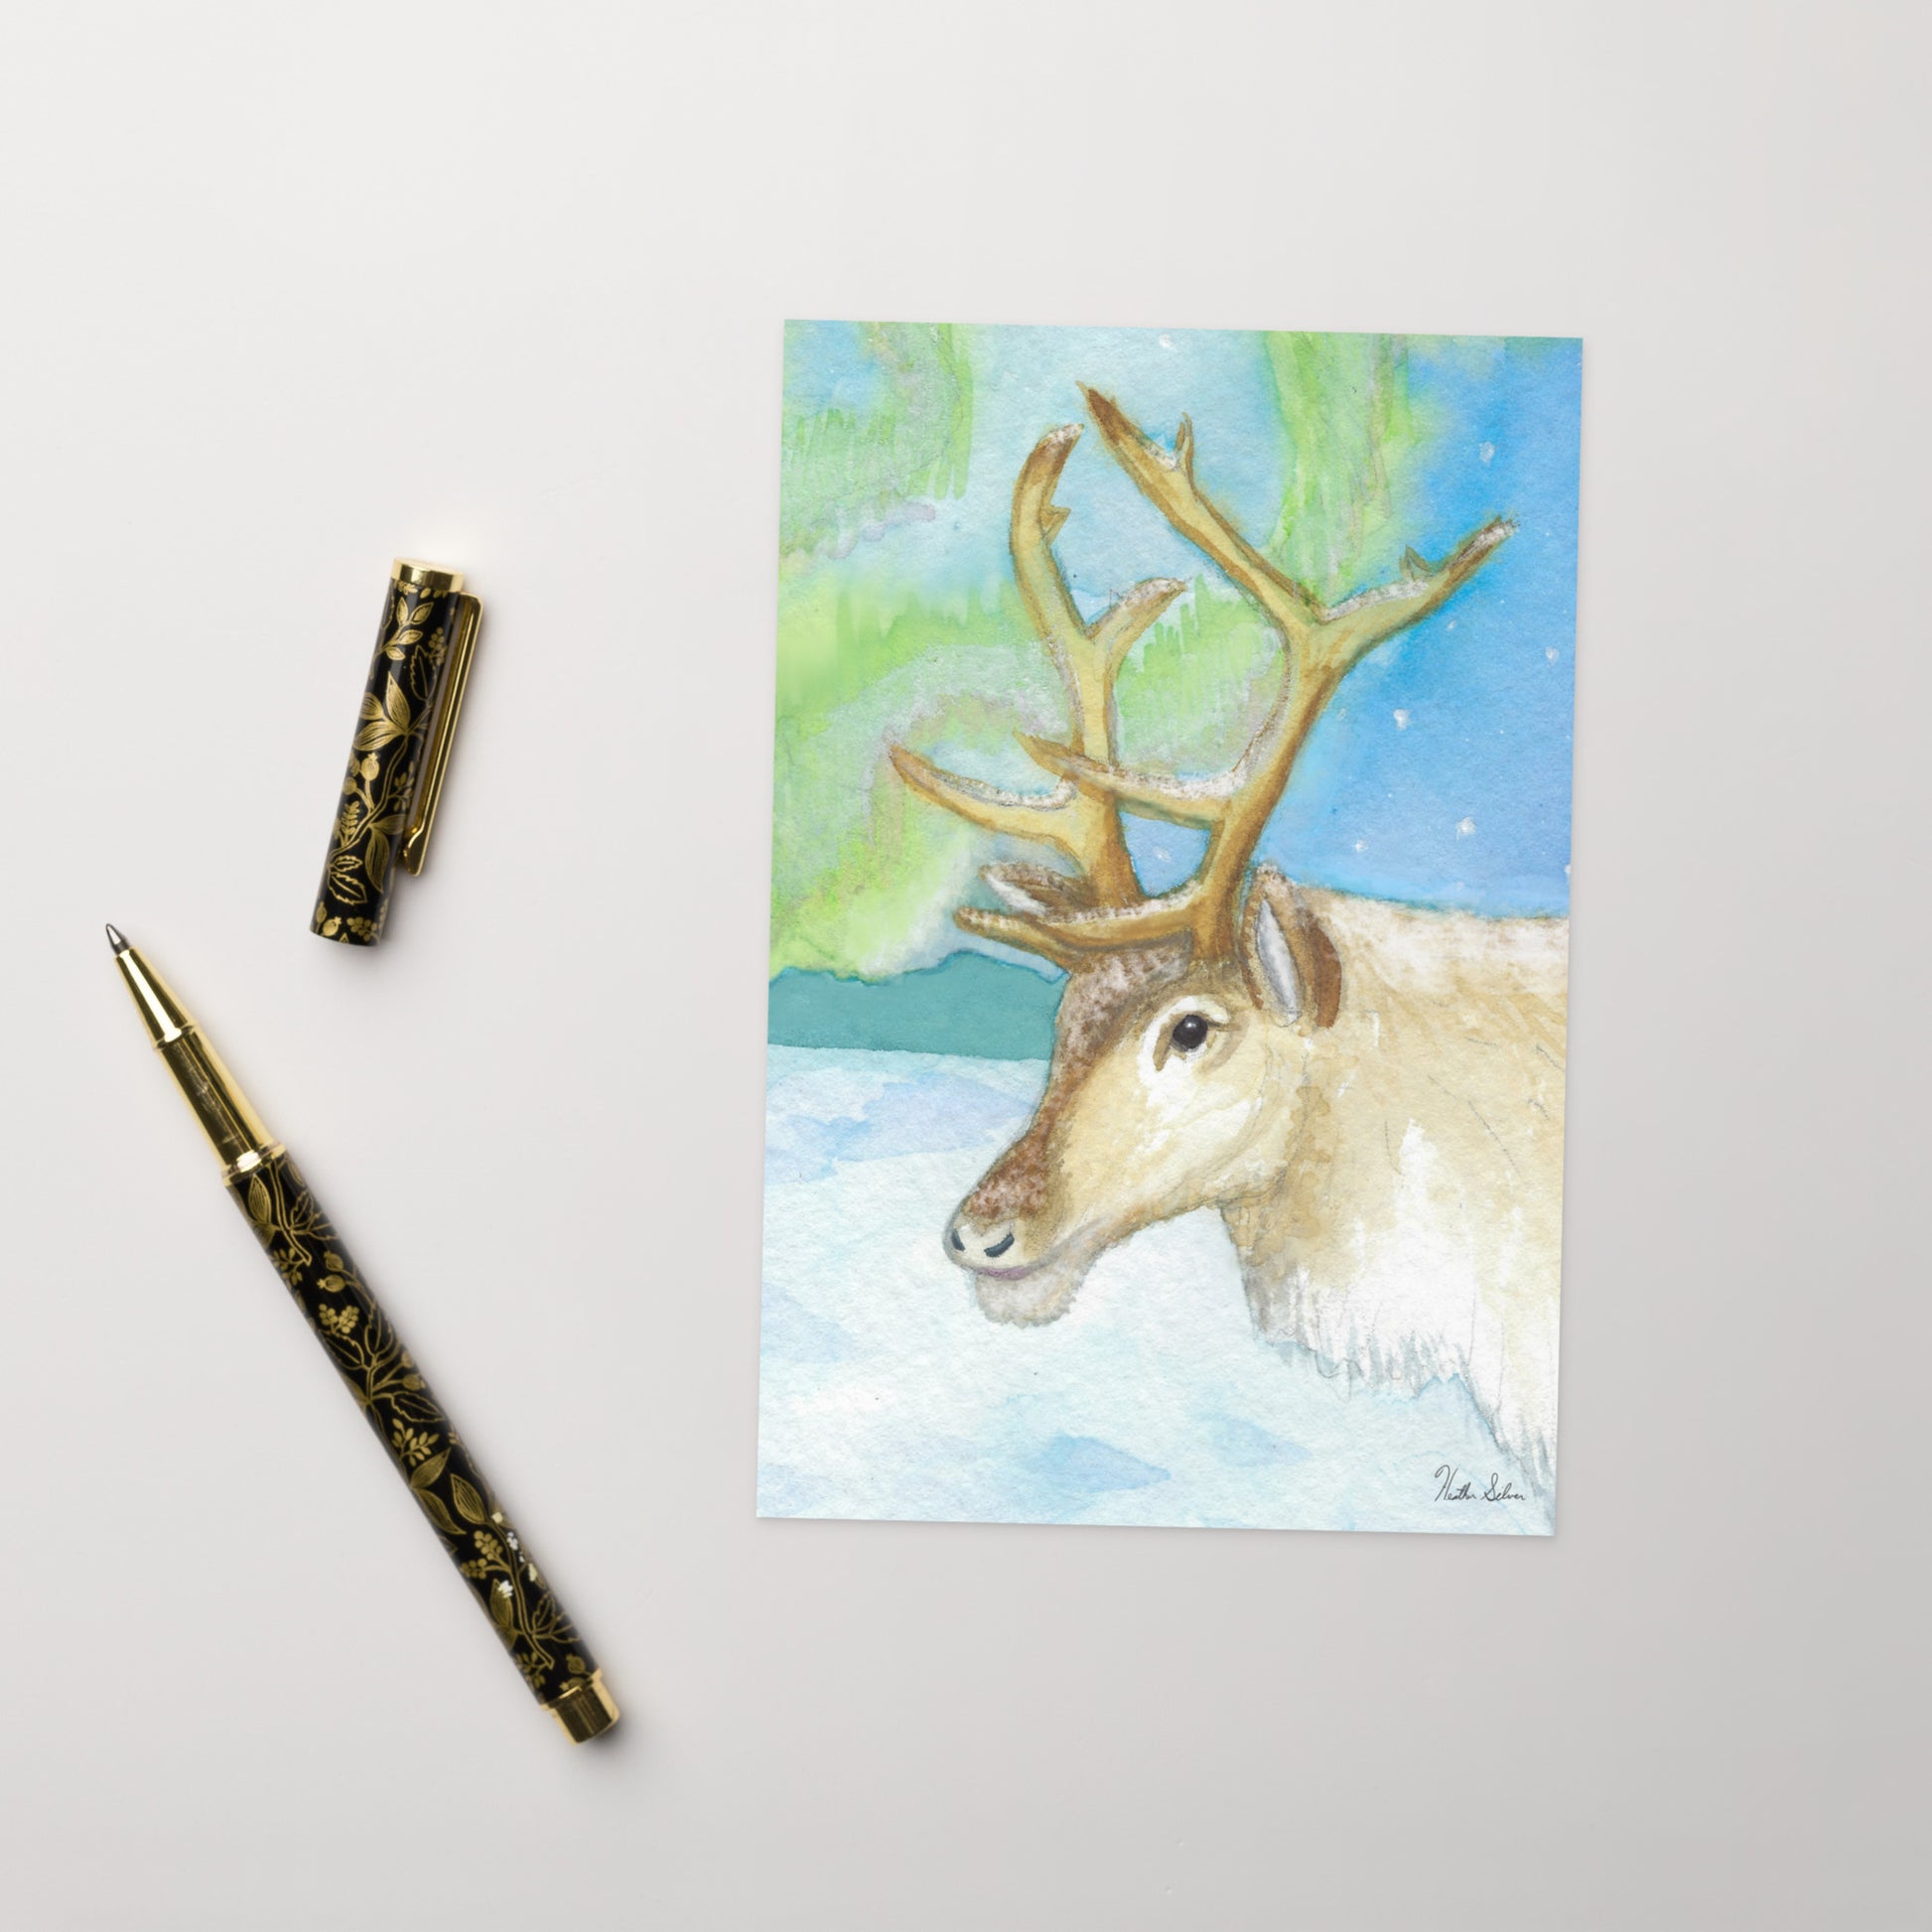 4 x 6 inch greeting card. Features watercolor print of a reindeer in the snow with northern lights in the sky. Blank inside. Comes with a white envelope. Shows front and back cover. Shown on table by pen.